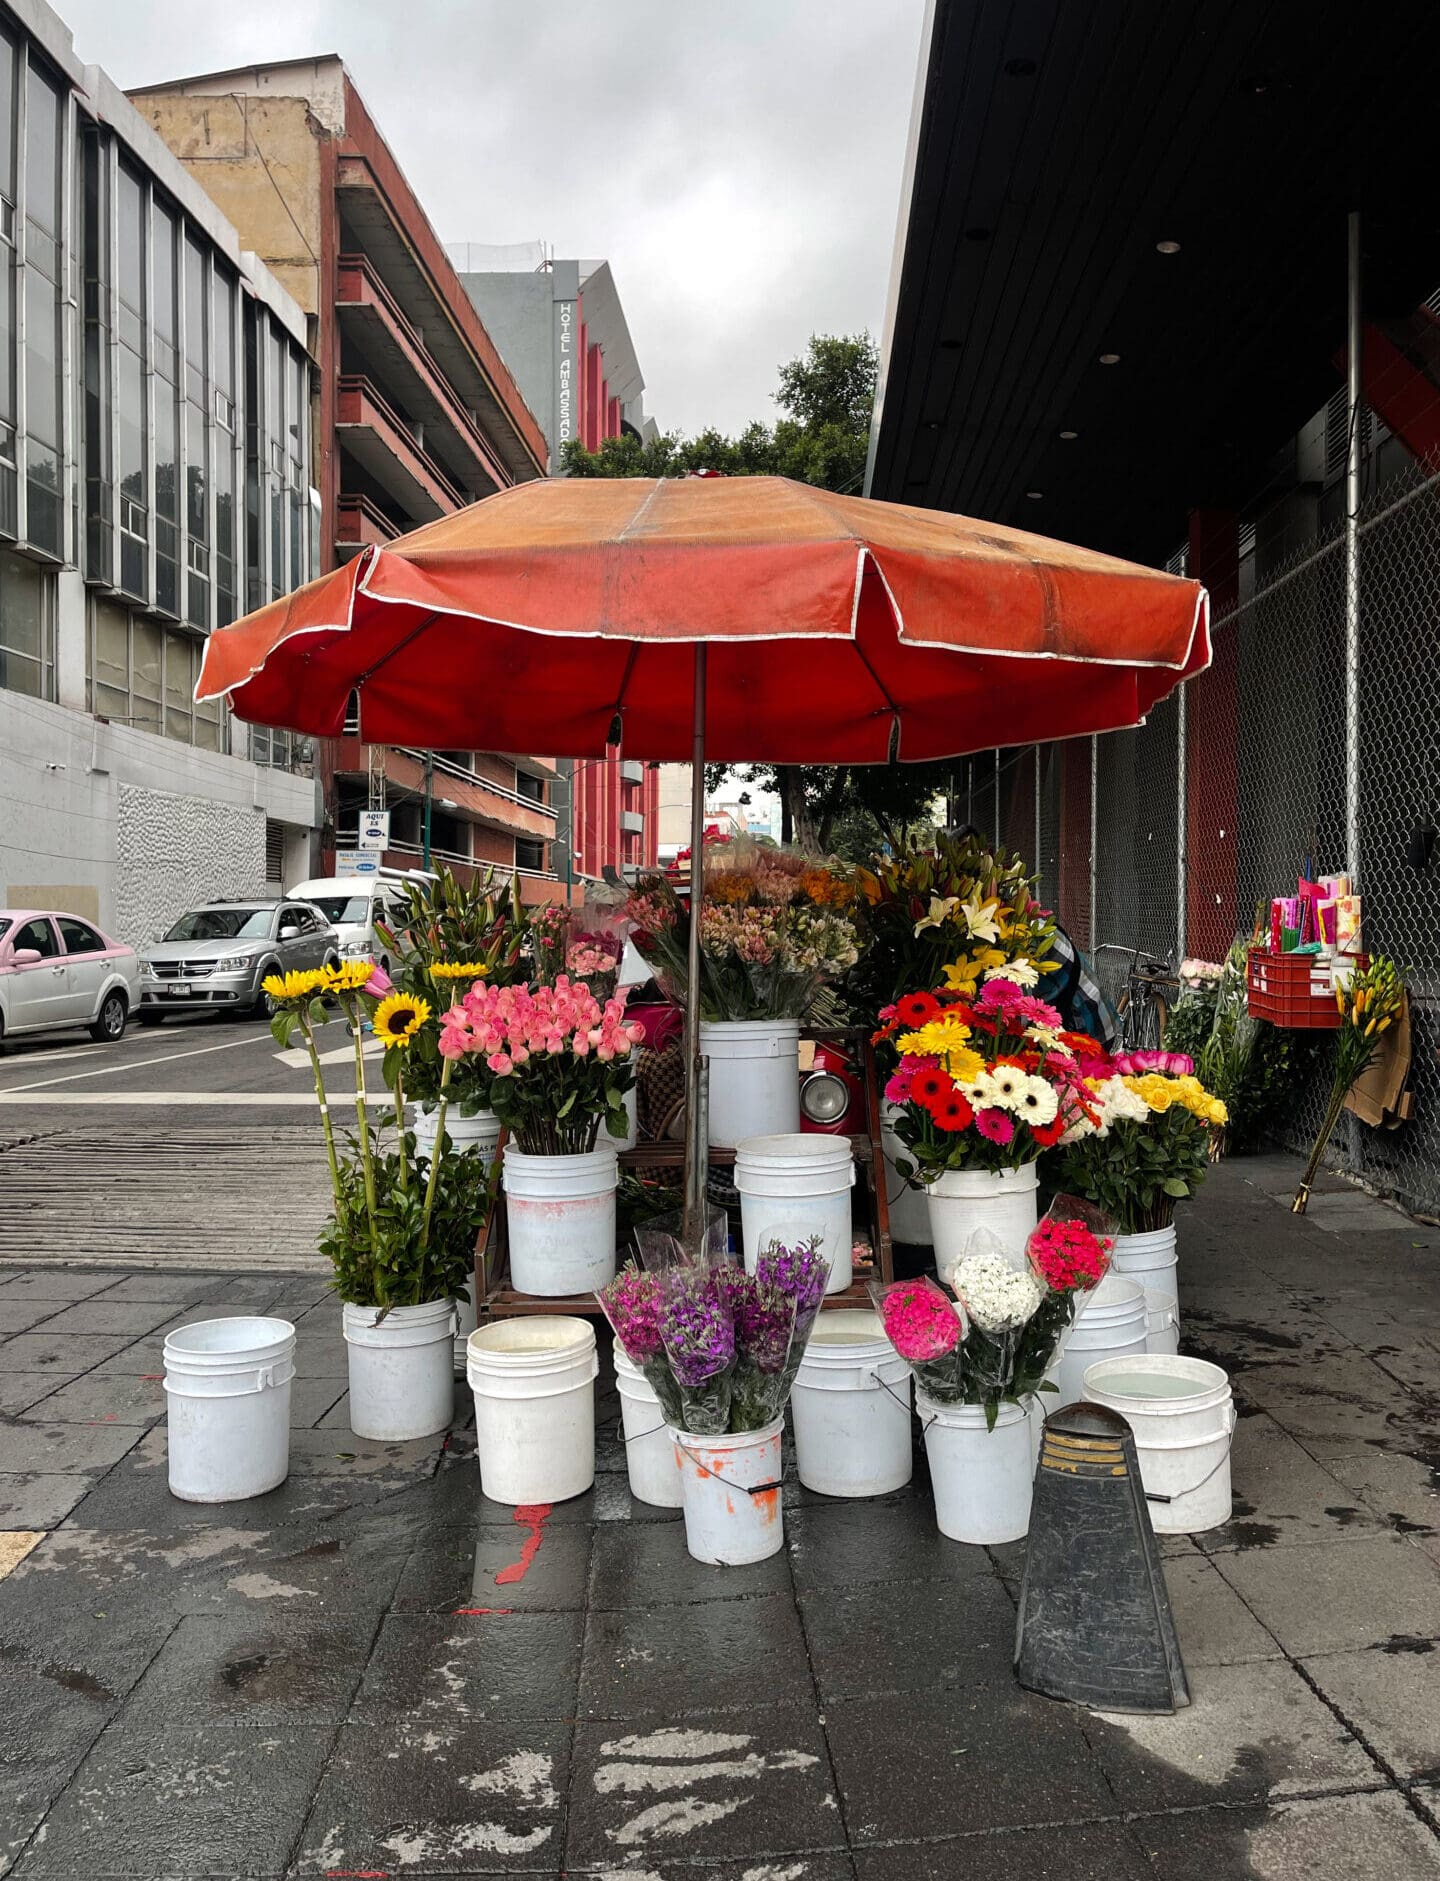 Photographer Manuel Zúñiga on Mexico City | A flower stand on a paved street, with white buckets filled with flowers in pink, purple, red, yellow and white, under a faded orange umbrella